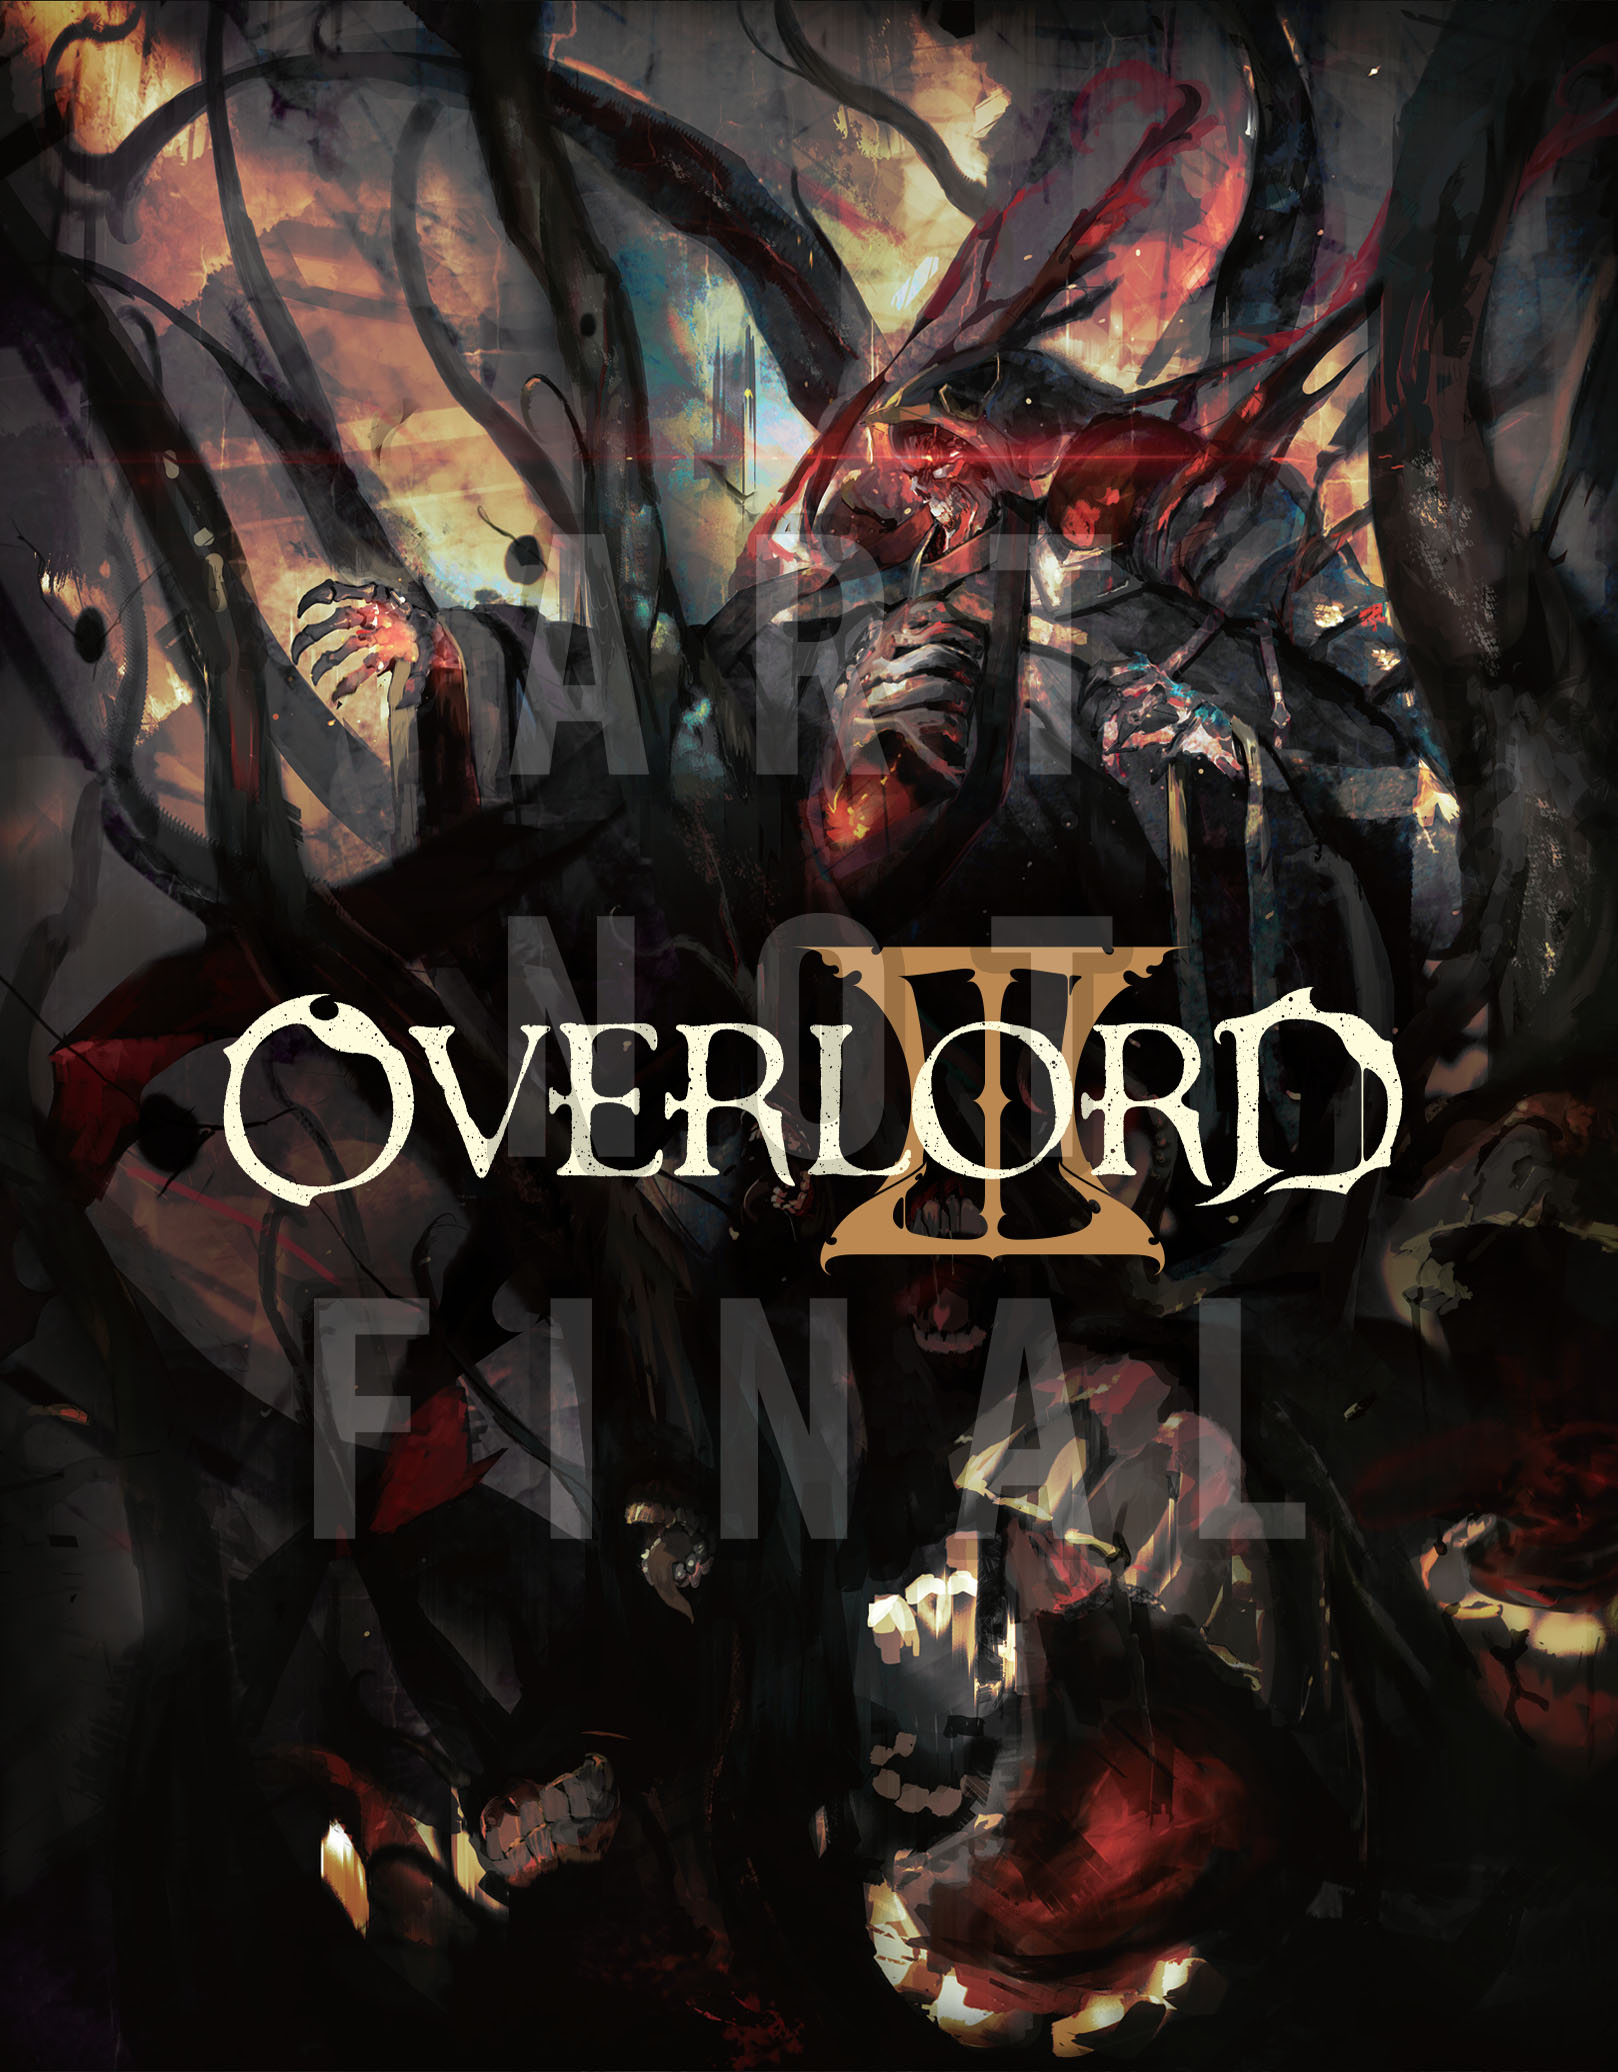 Skyro on X: Overlord art is the best seaseon 3 is Awsome so far